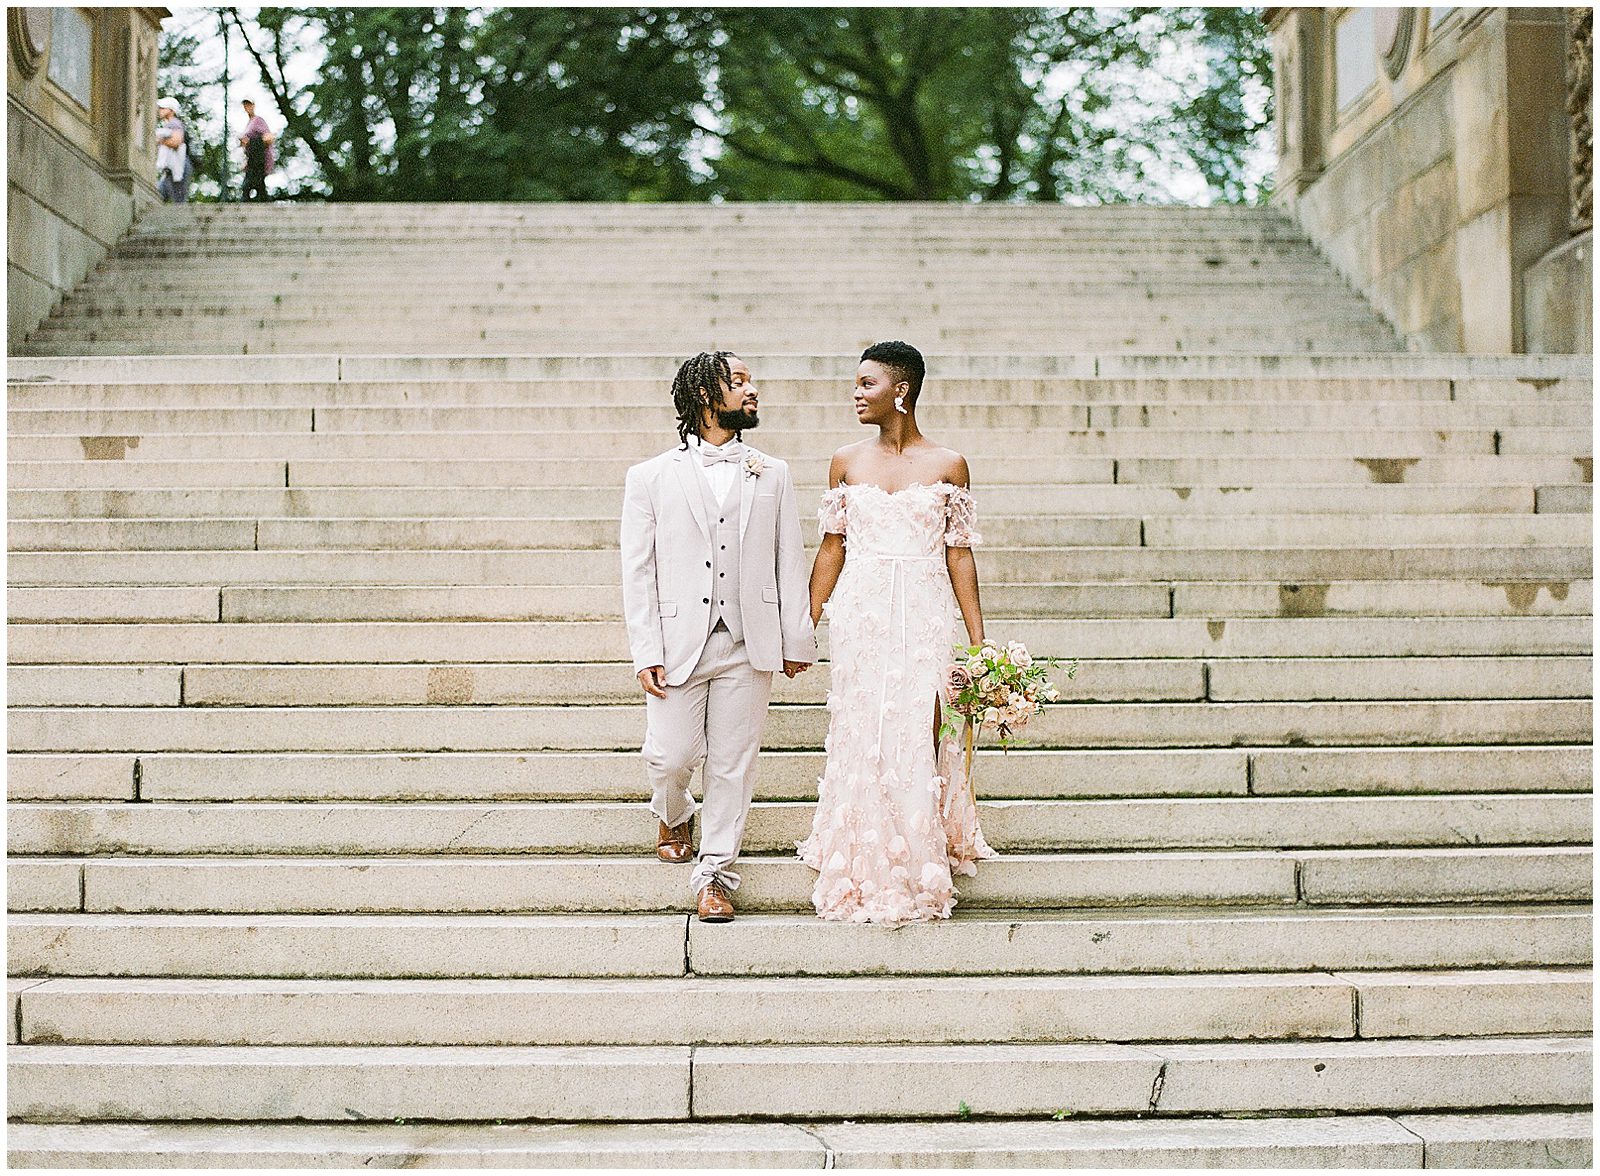 Central Park Wedding Bride and Groom Walking Down Bethesda Terrace Stairs Photo